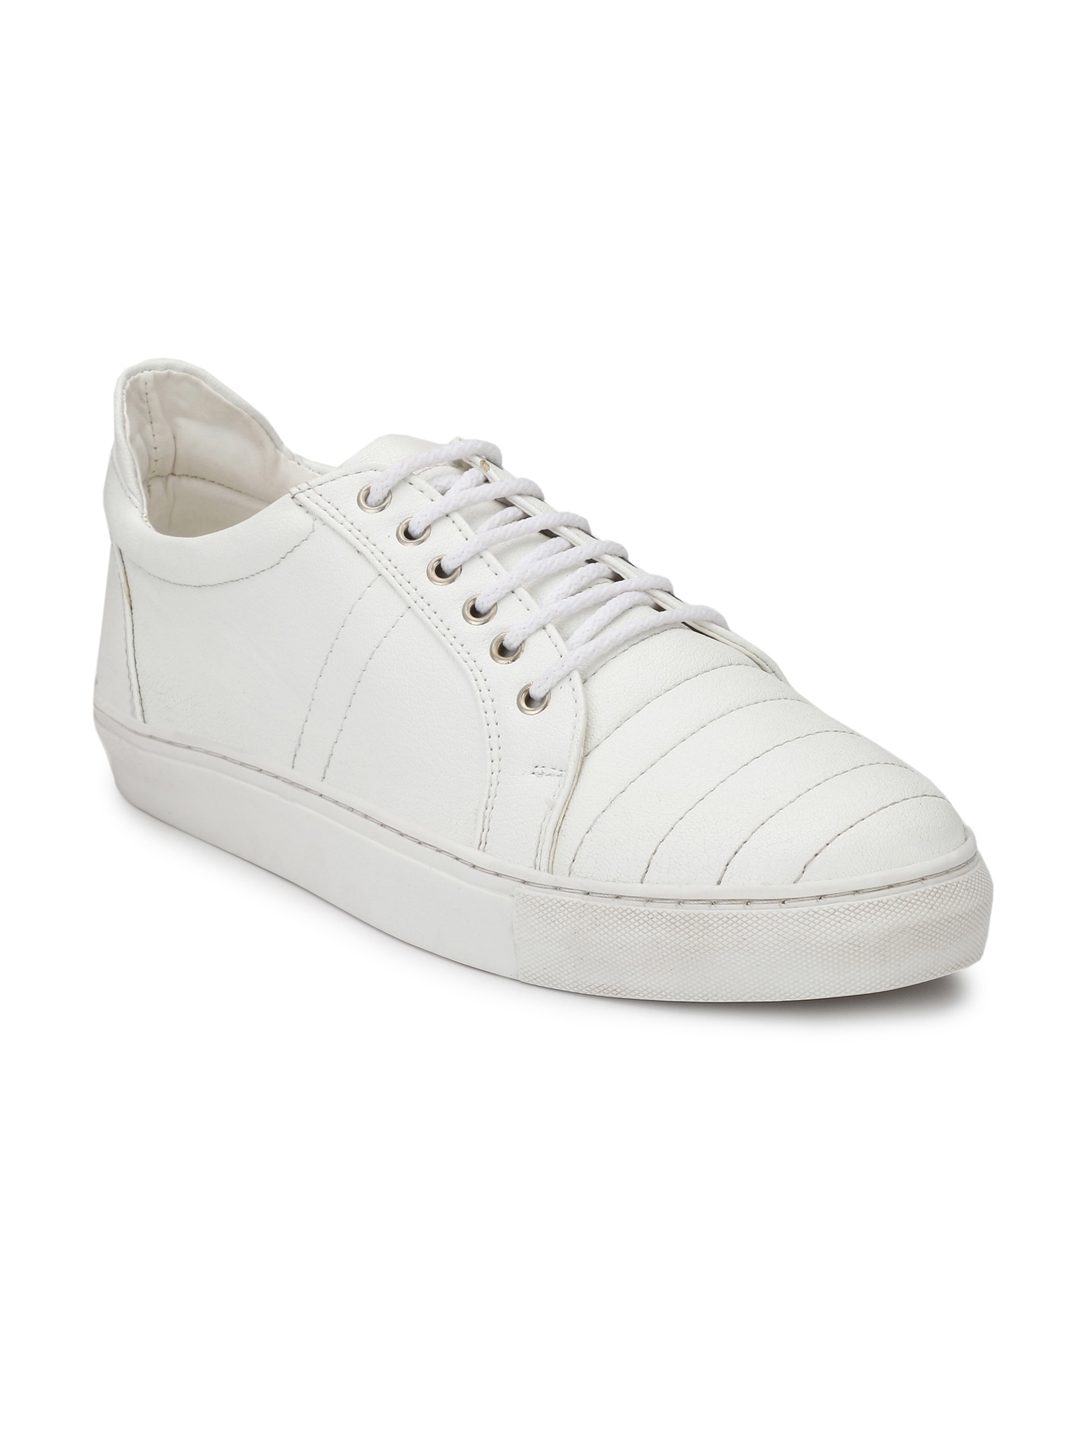 Buy Guava Men White Sneakers - Casual Shoes for Men 2496061 | Myntra